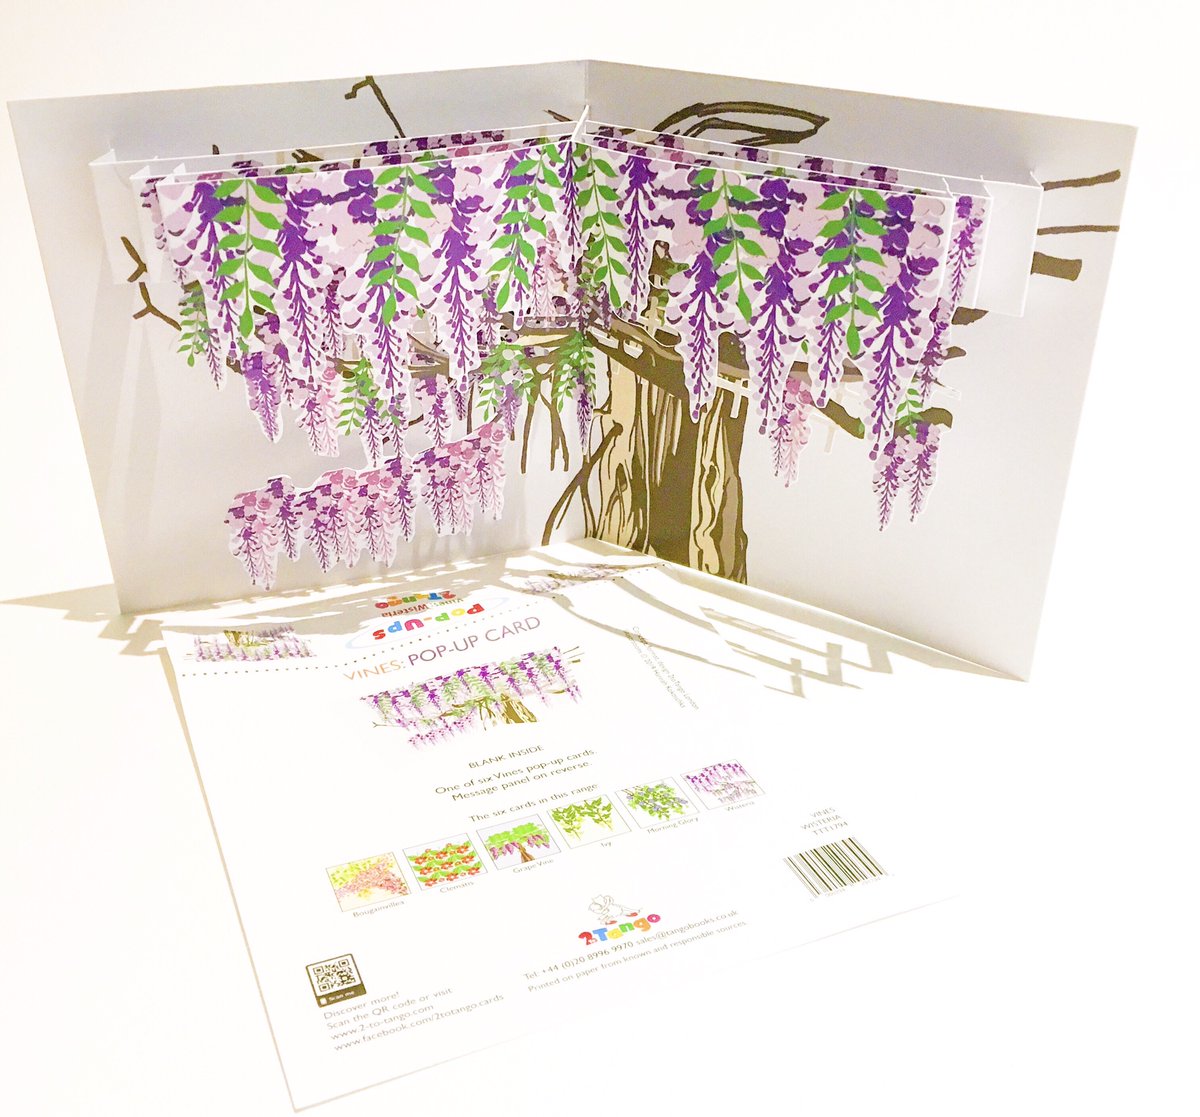 #ukgiftam #ukgifthour @UKGiftHour @UKGiftHourPower with #wisteria in abundance…how about a #spring #vine themed #popupcard #greetingscard that can be framed and kept #sustainability 2-to-tango.com